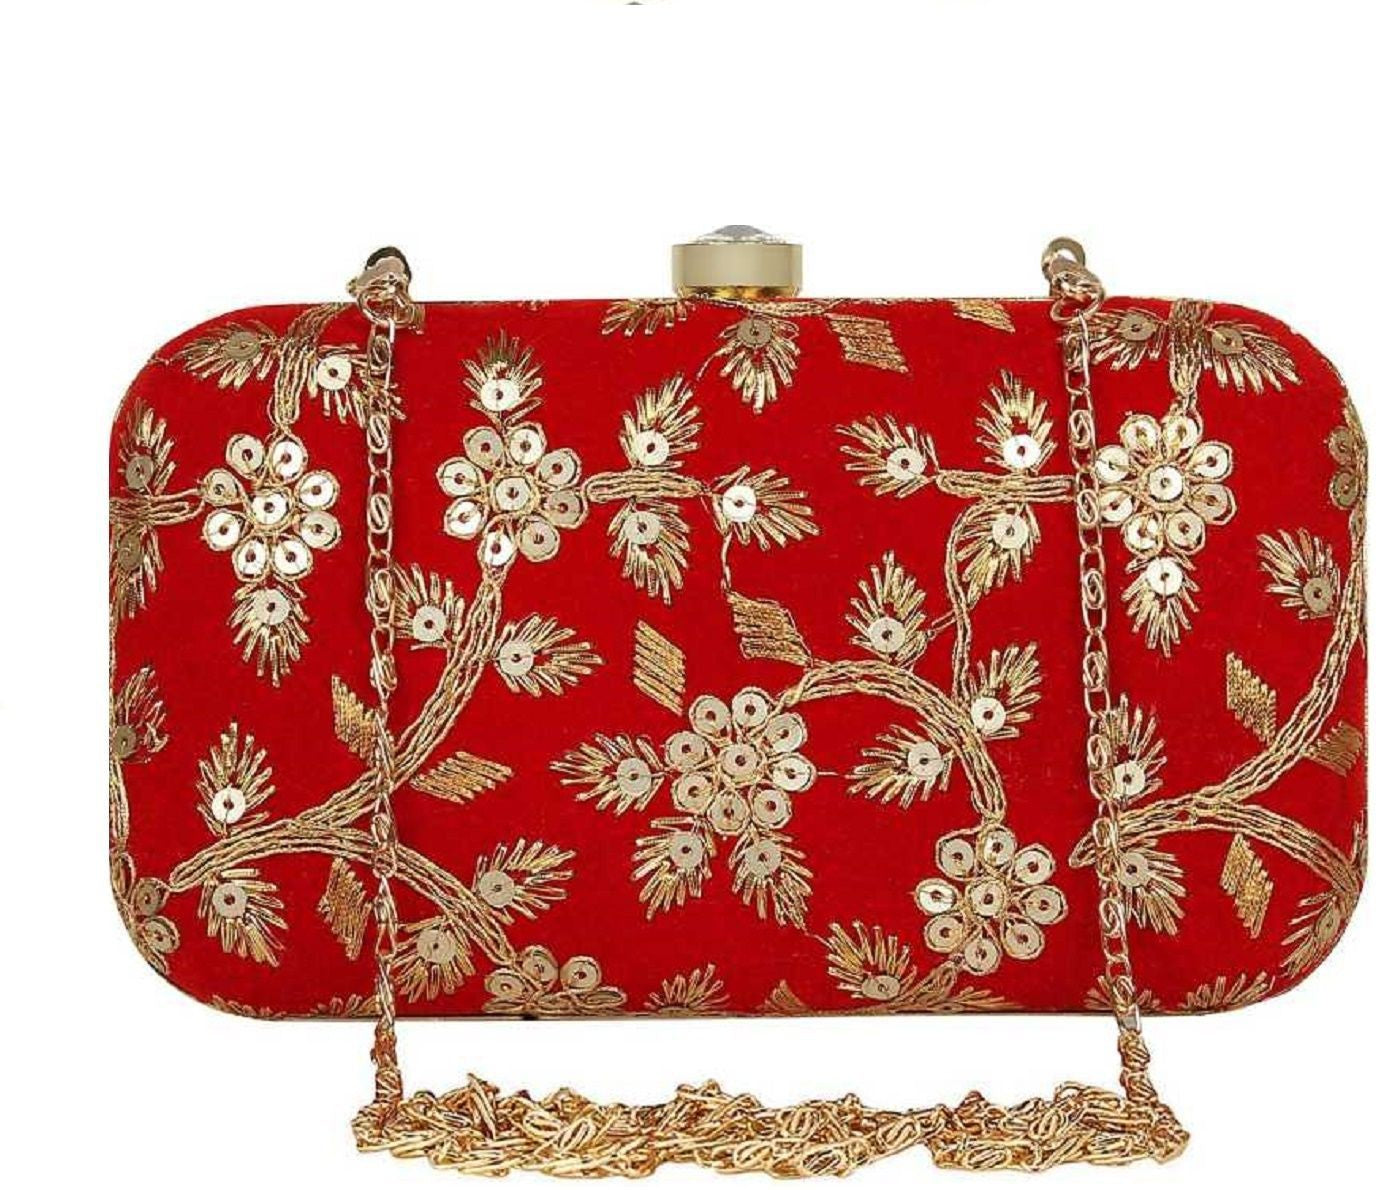 Women's Handicraft Party Wear Hand Embroidered Box Clutch Bag Purse For Bridal, Casual, Party, Wedding - Ritzie